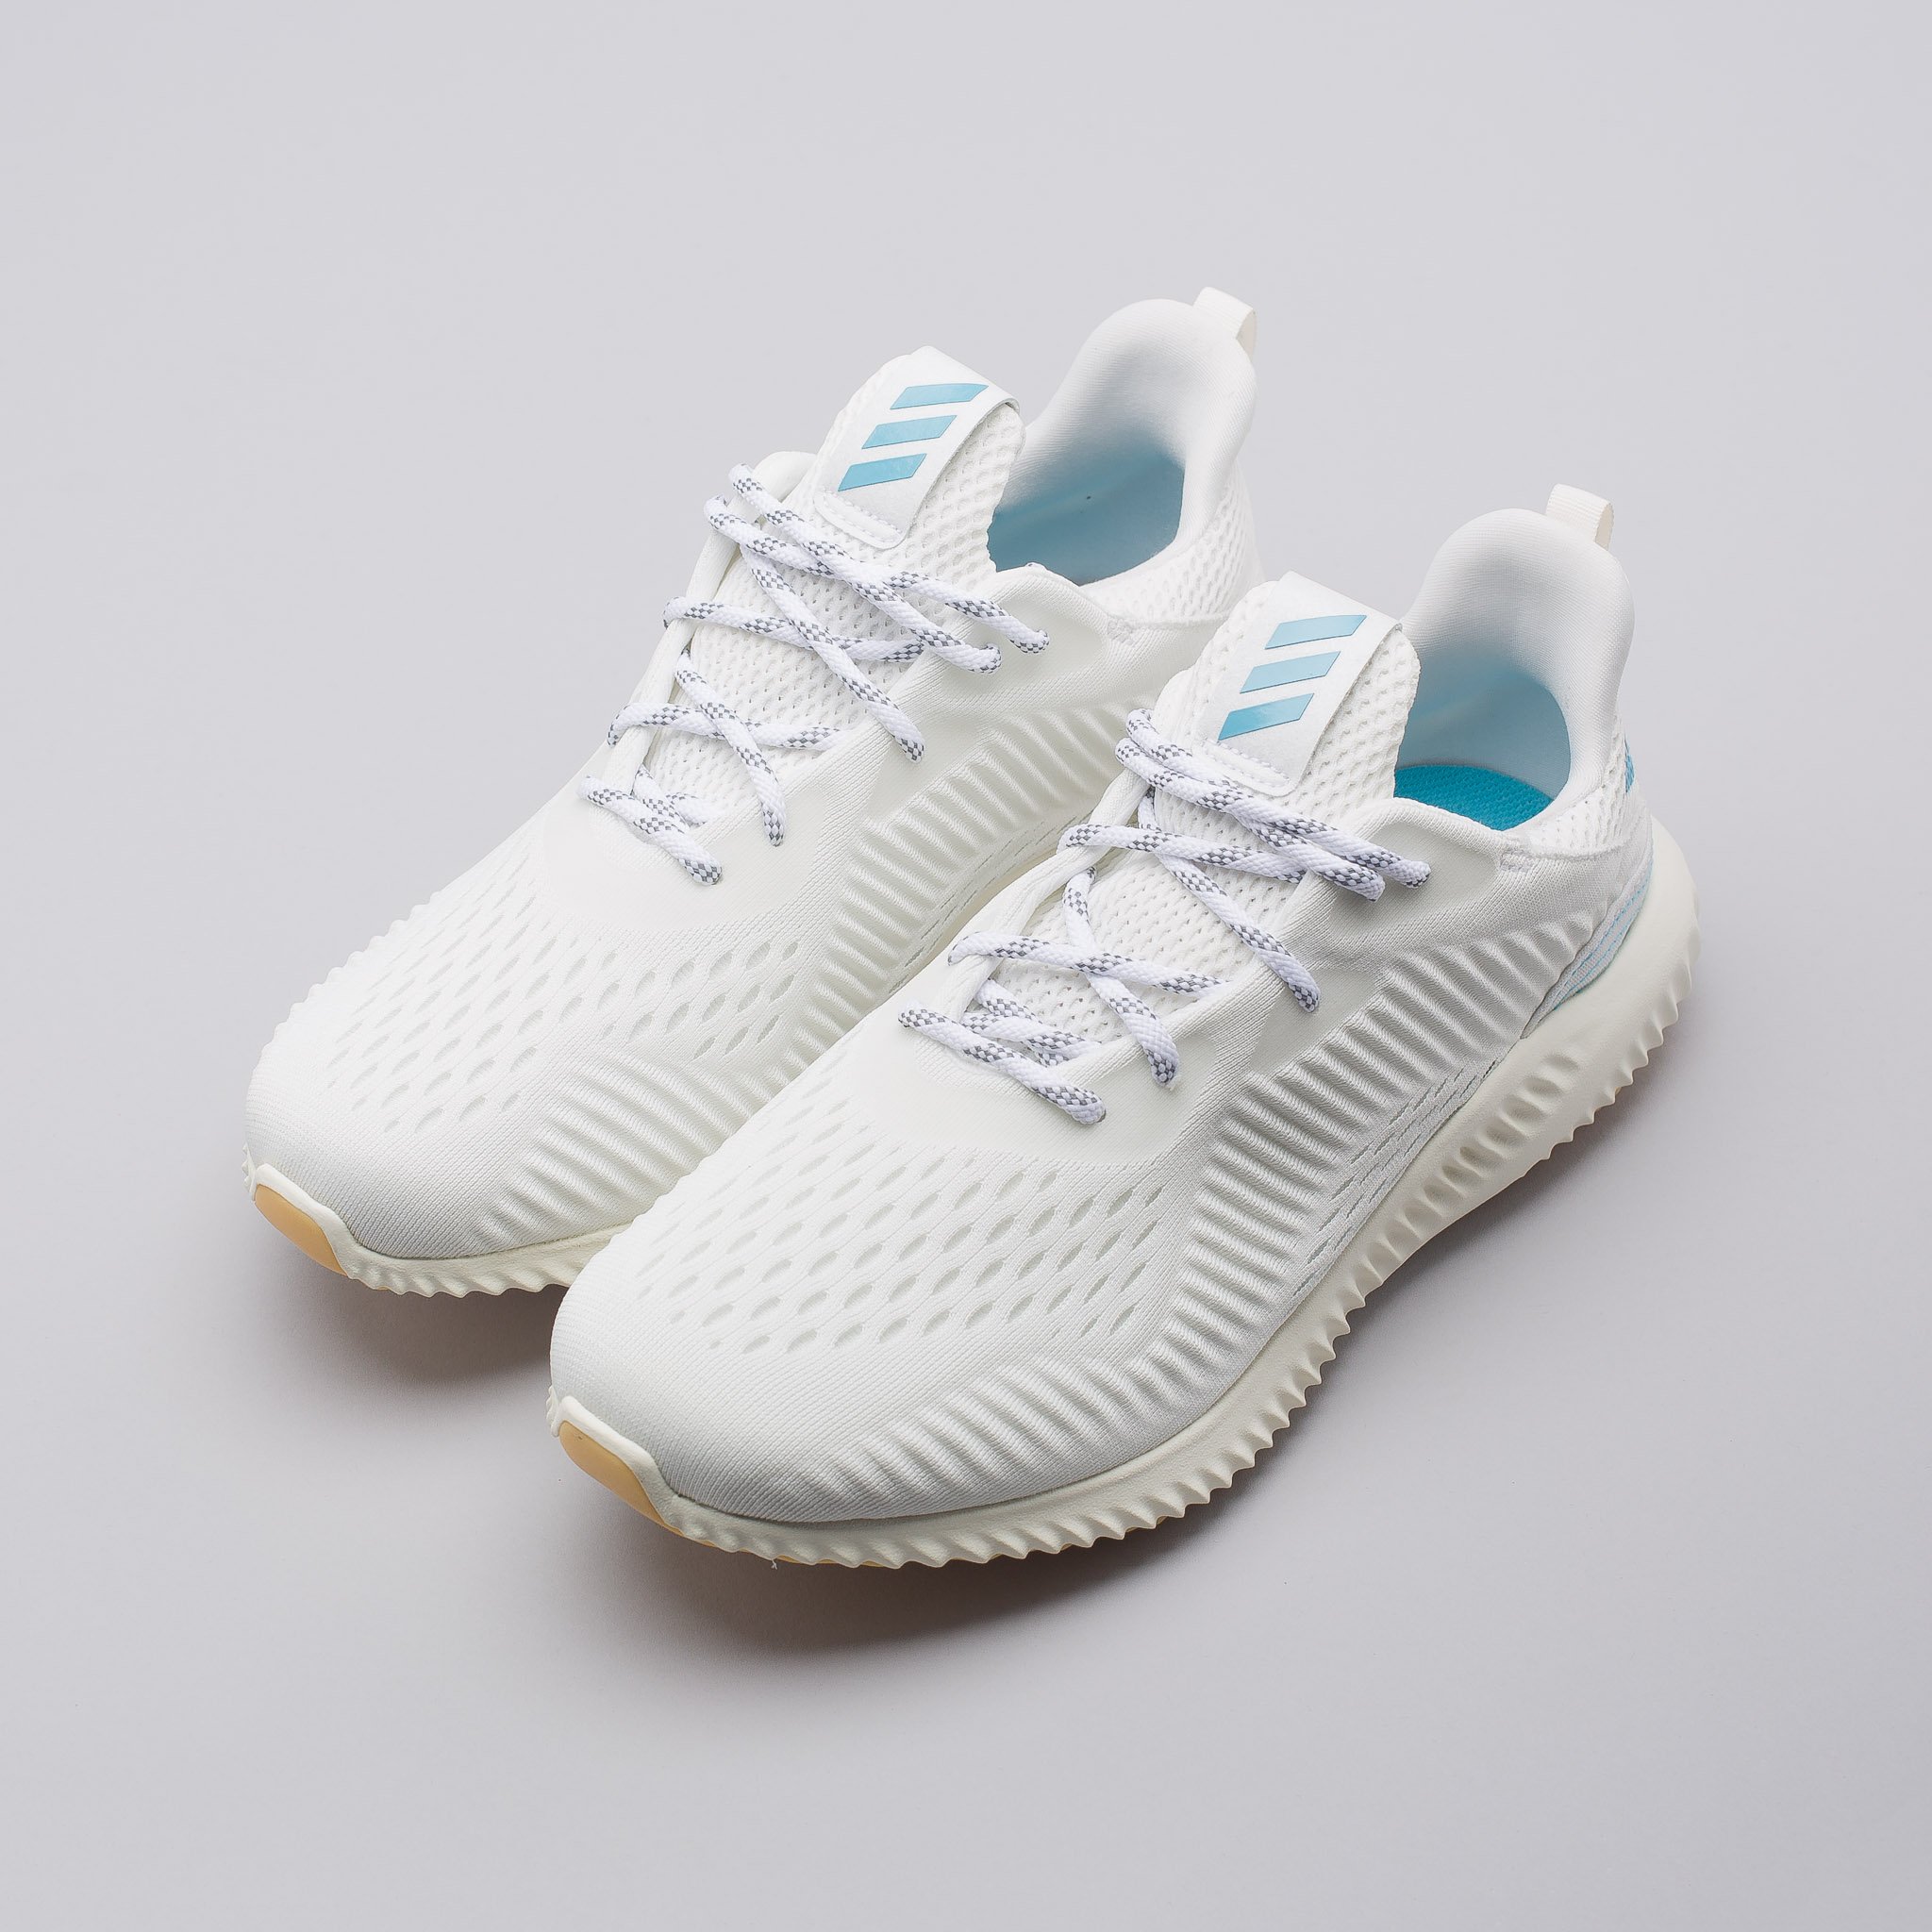 parley alphabounce> OFF-75%